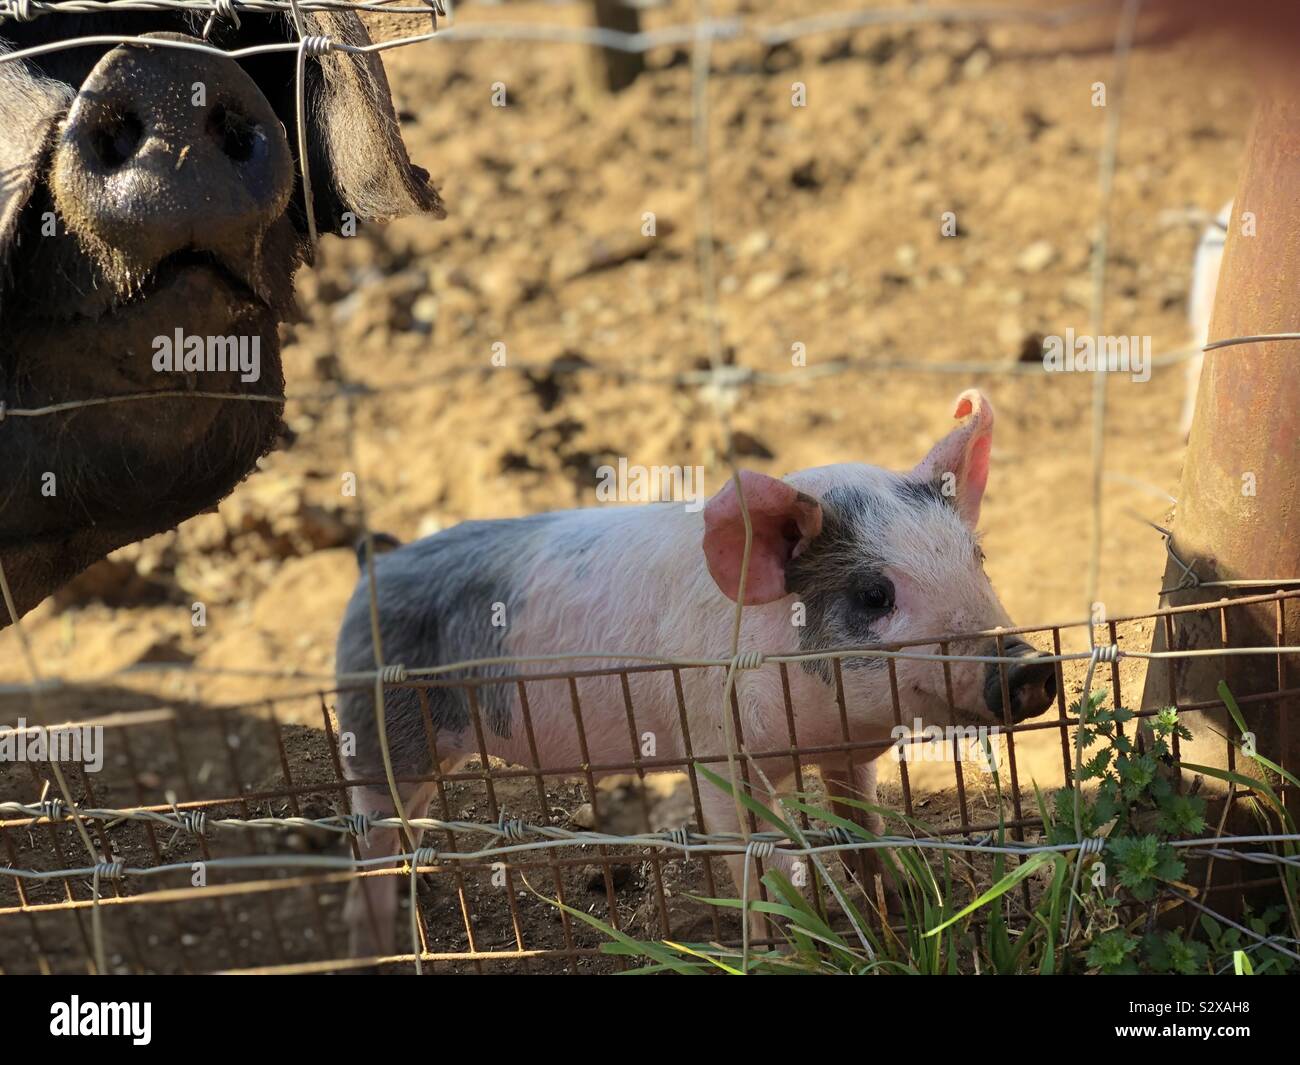 It’s Babe!! Two month old pink piglet approaching the fence. Curious and very cute. Stock Photo